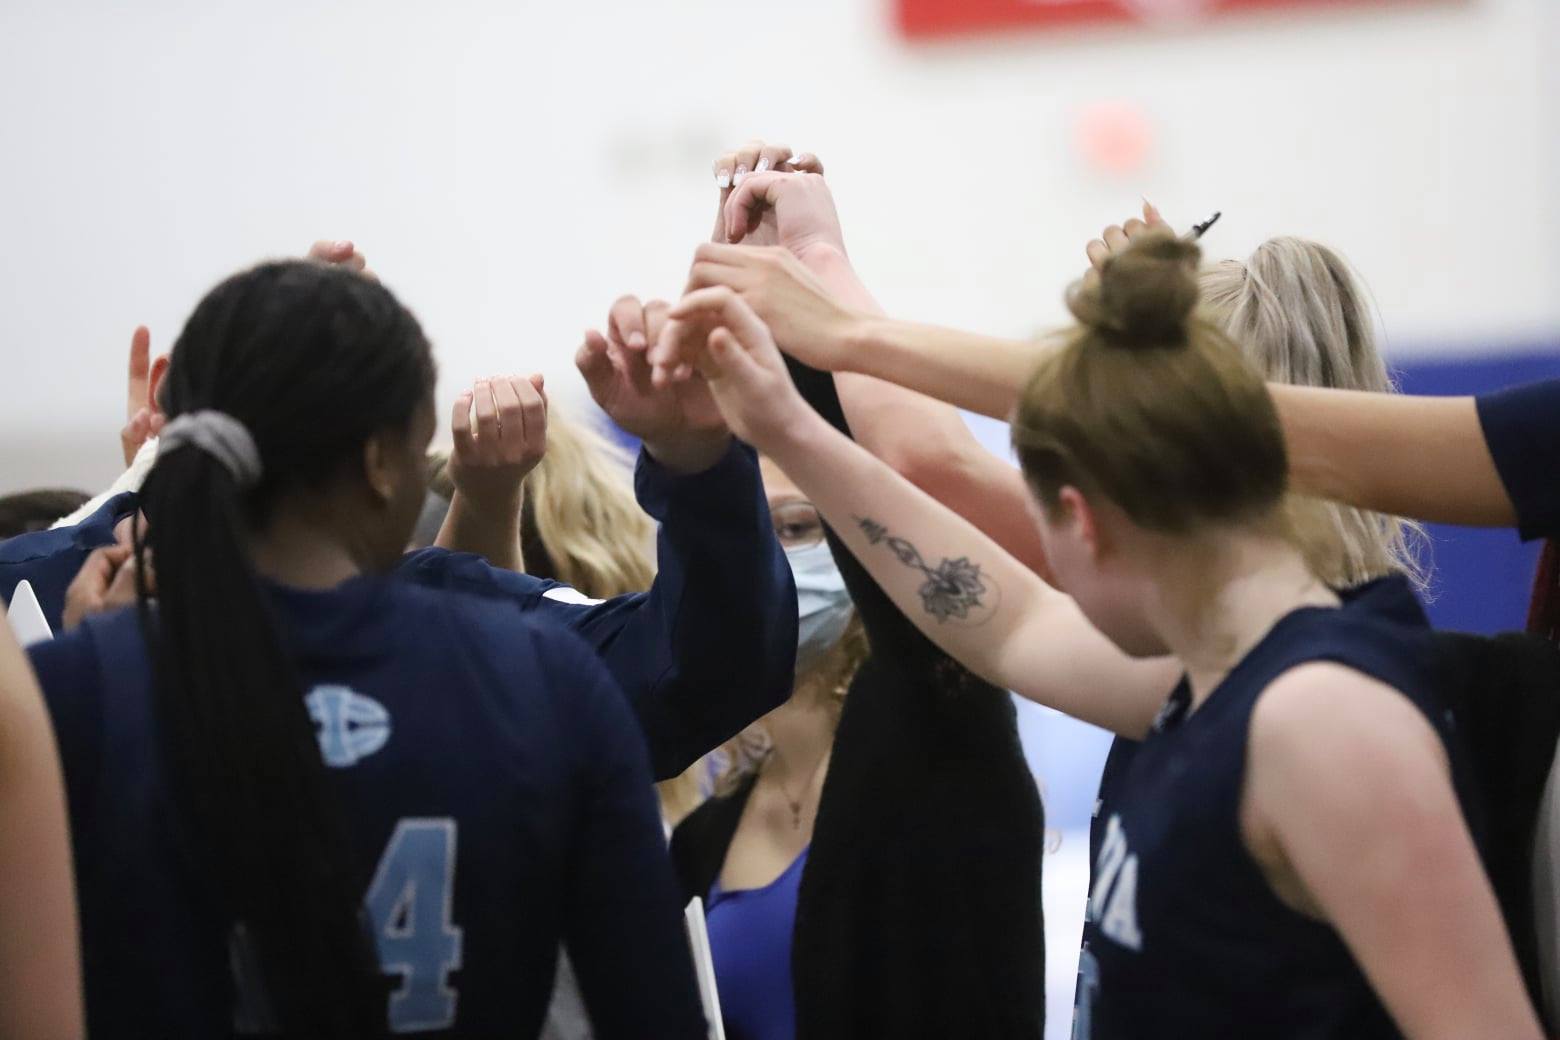 Iowa Central's tourney run comes to an end